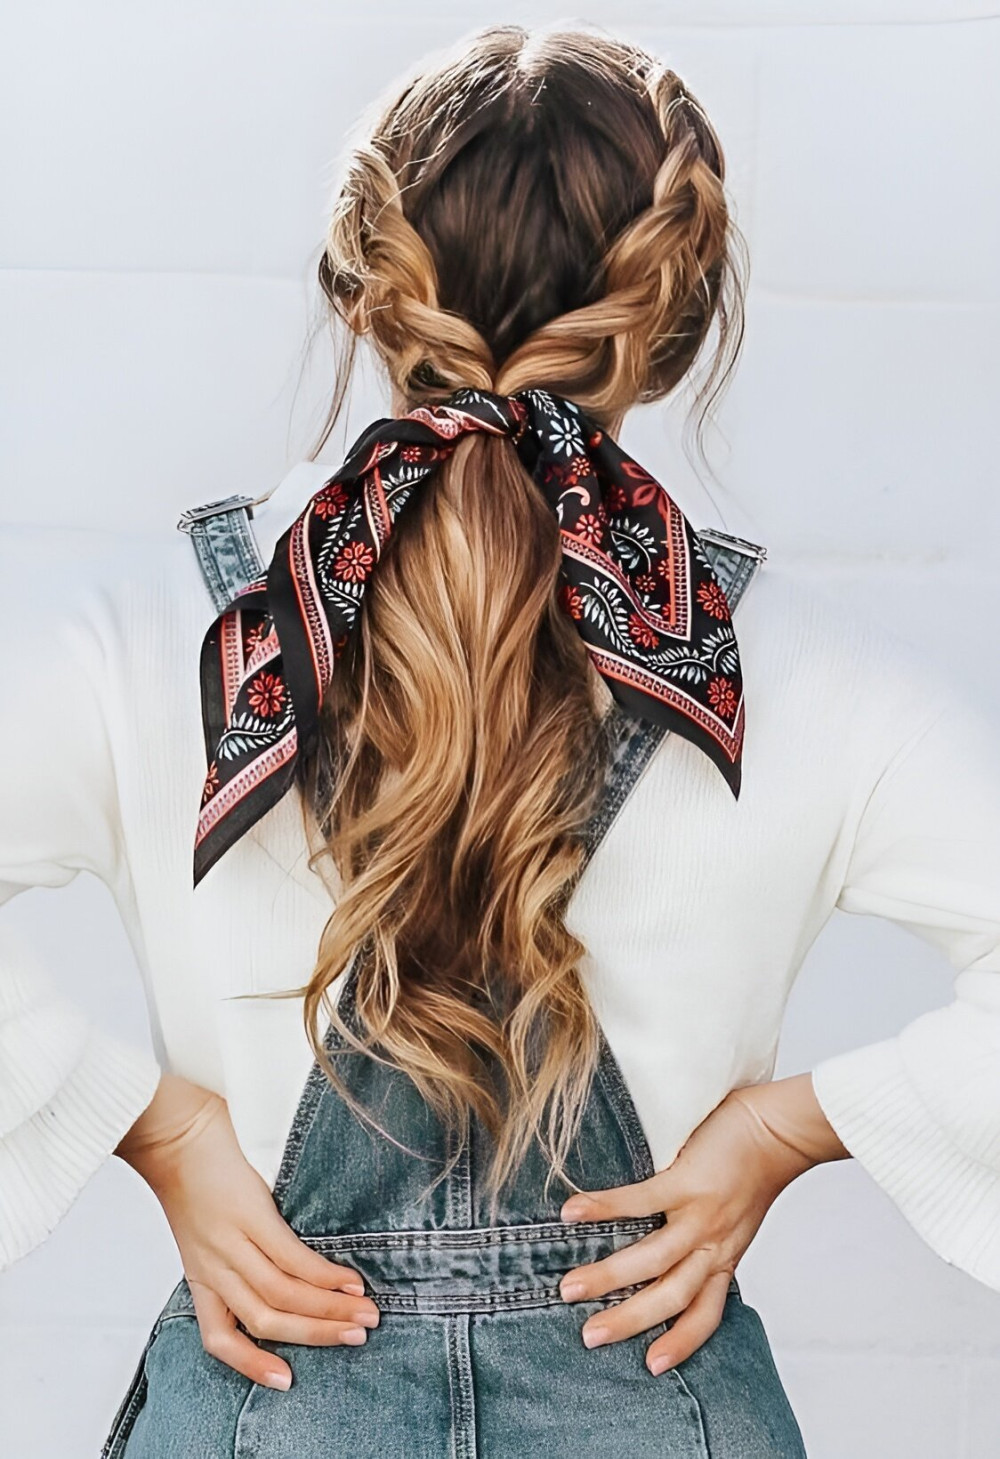 Cute Braided Hairstyles With Scarf